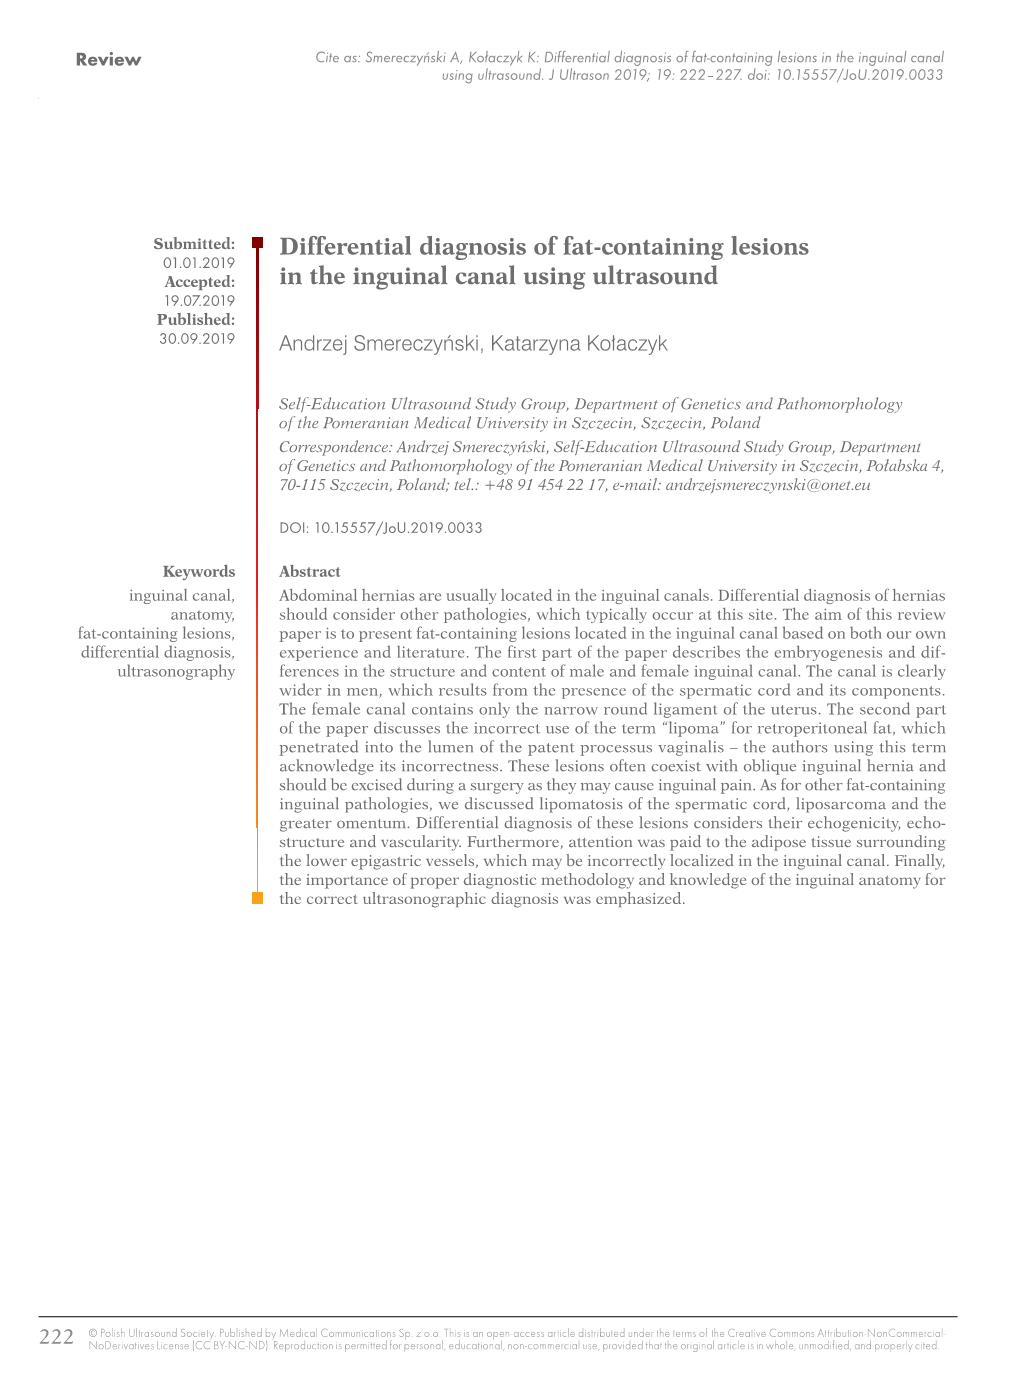 Differential Diagnosis of Fat-Containing Lesions in the Inguinal Canal Using Ultrasound